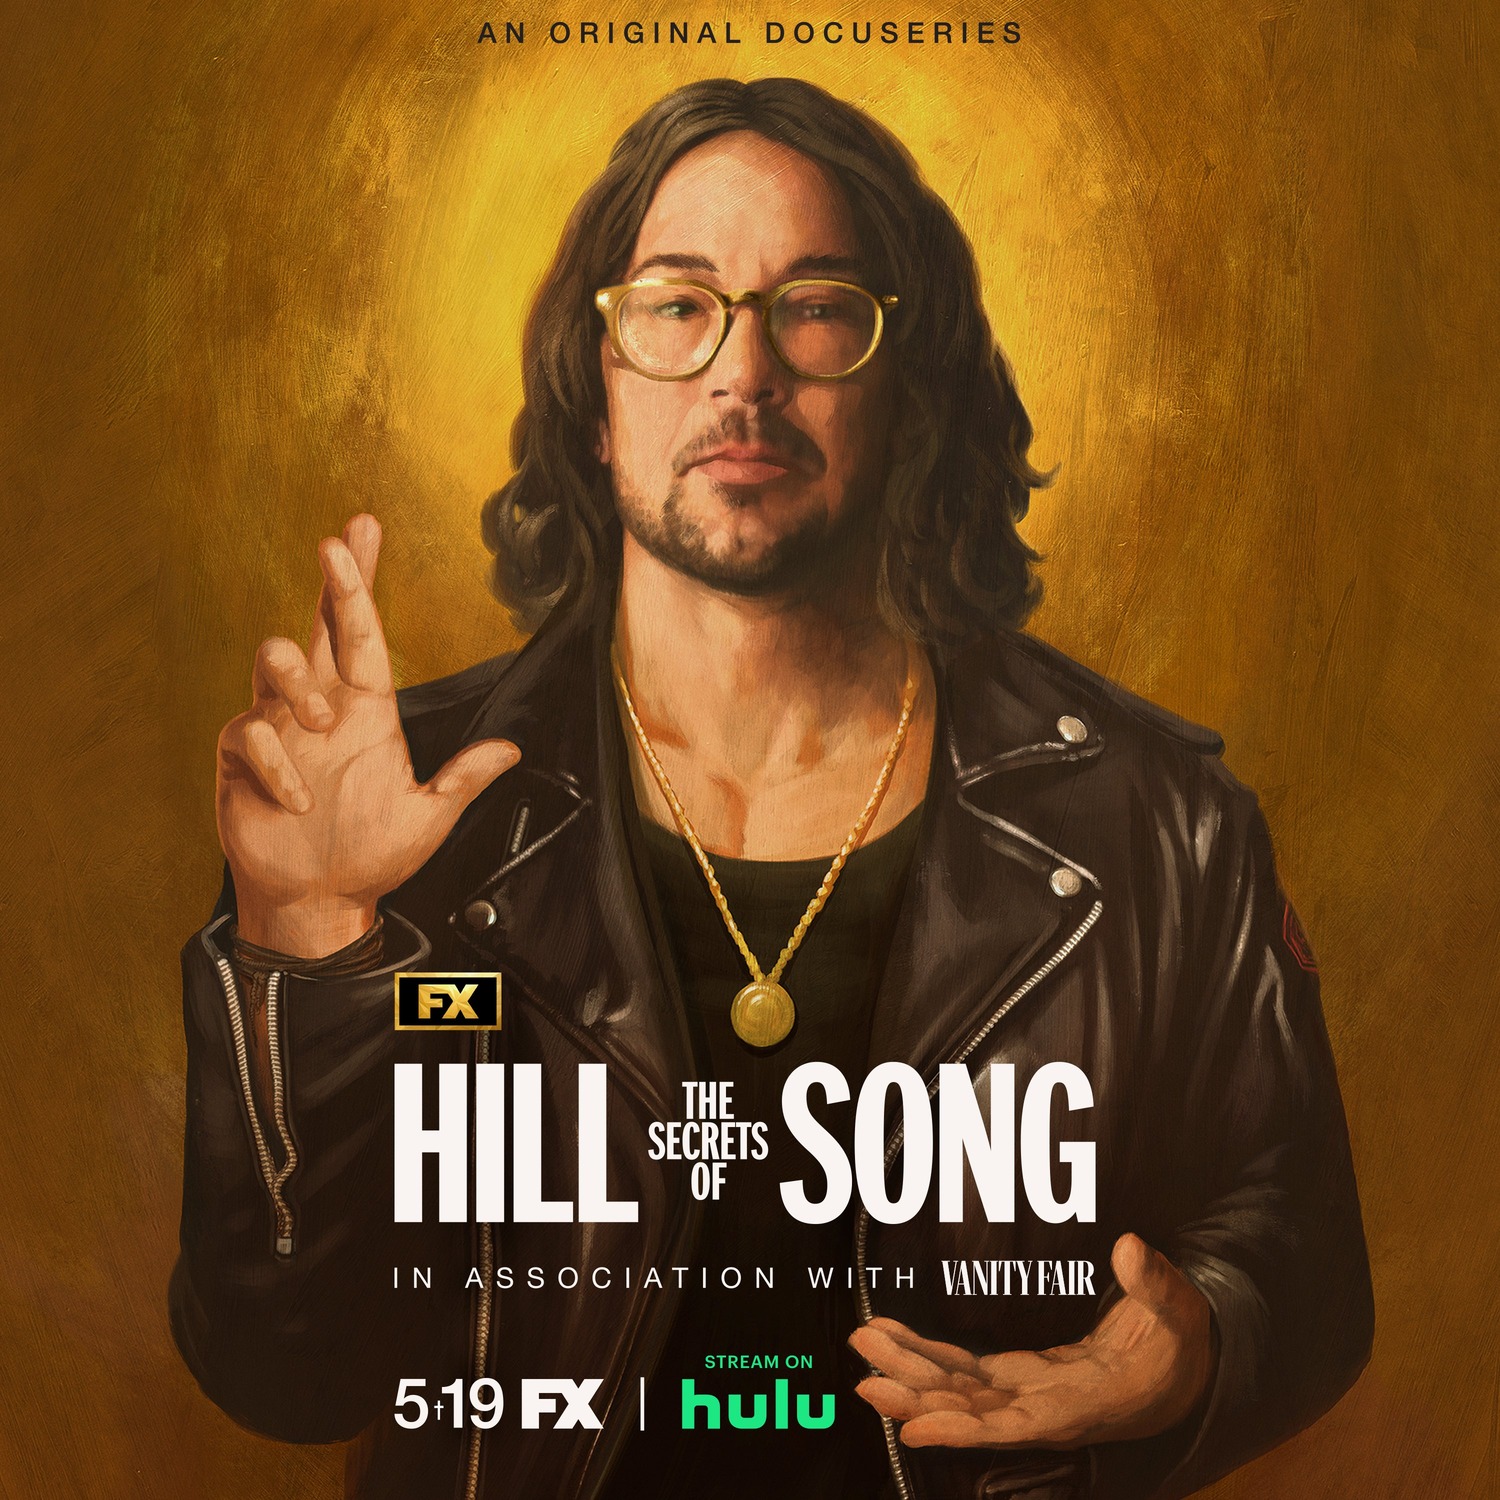 Extra Large TV Poster Image for The Secrets of Hillsong 